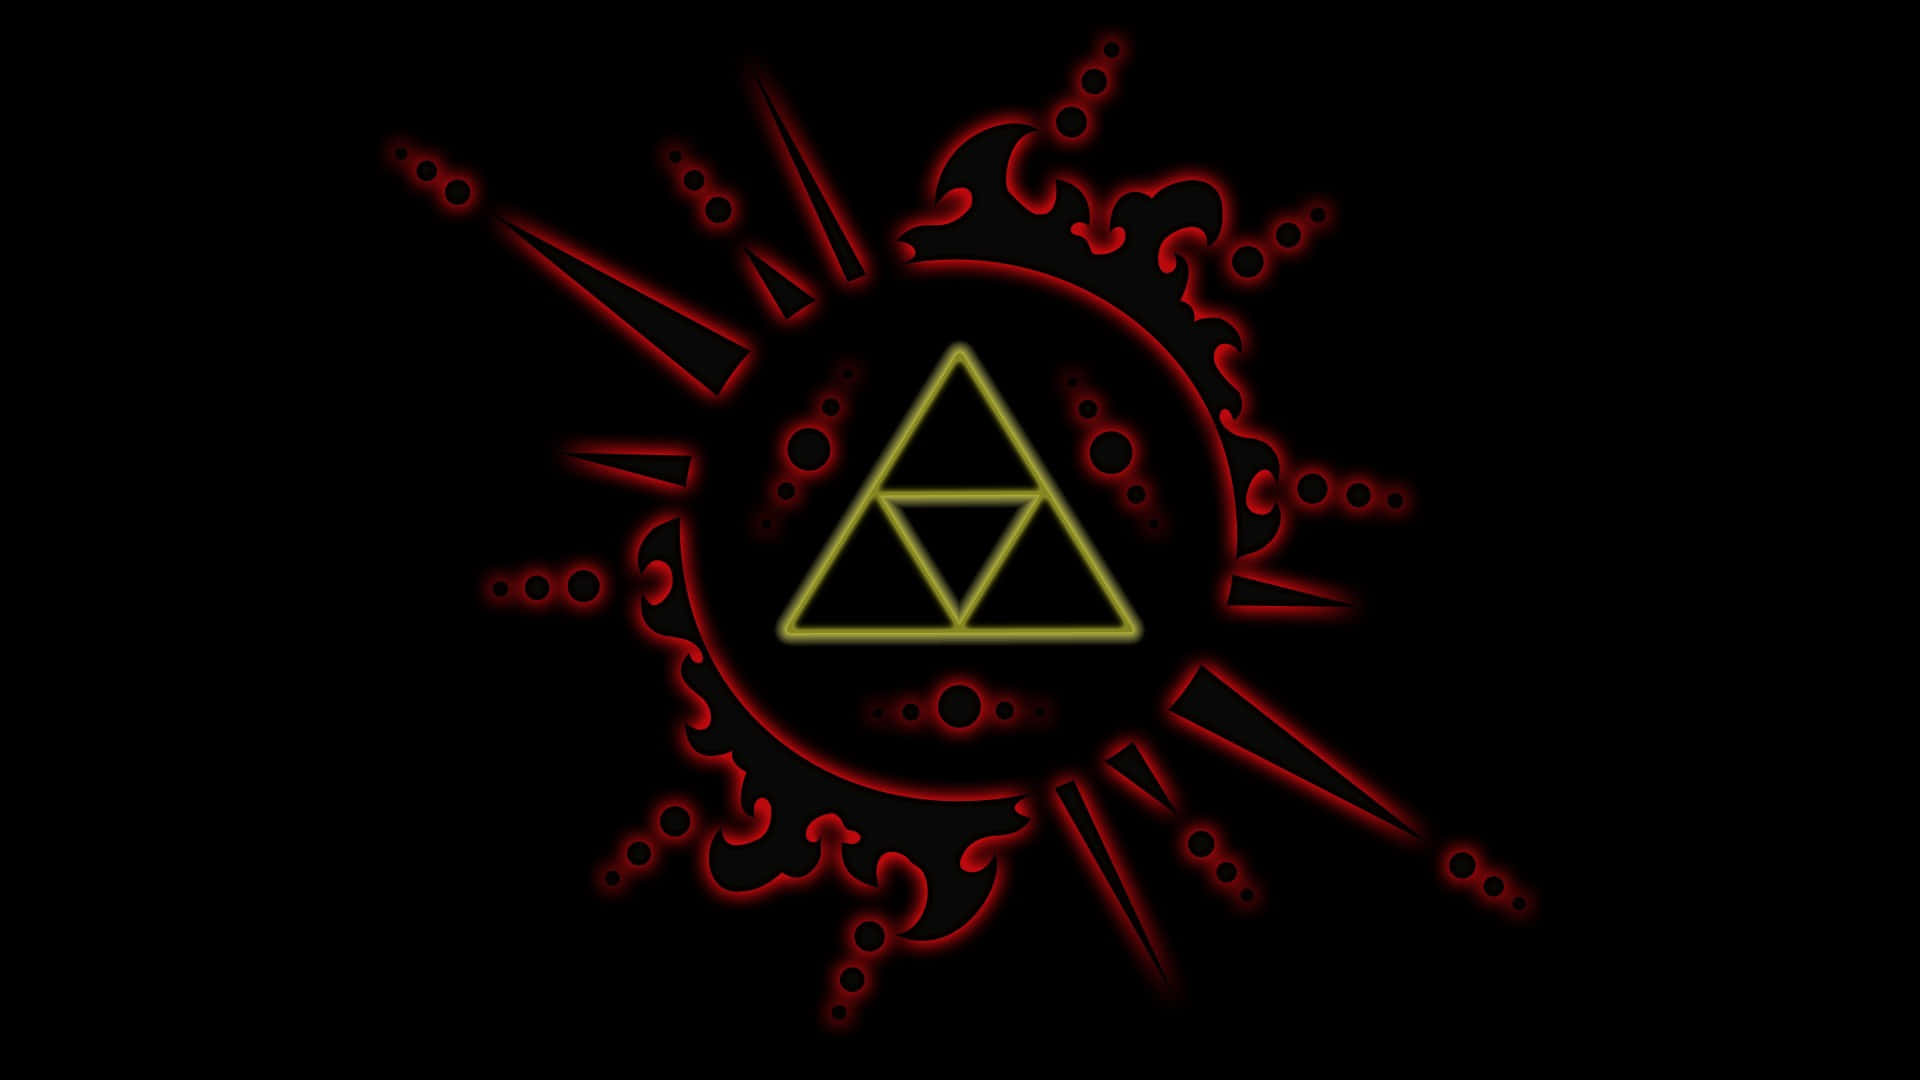 The Triforce: A Symbol Of Power, Wisdom And Courage